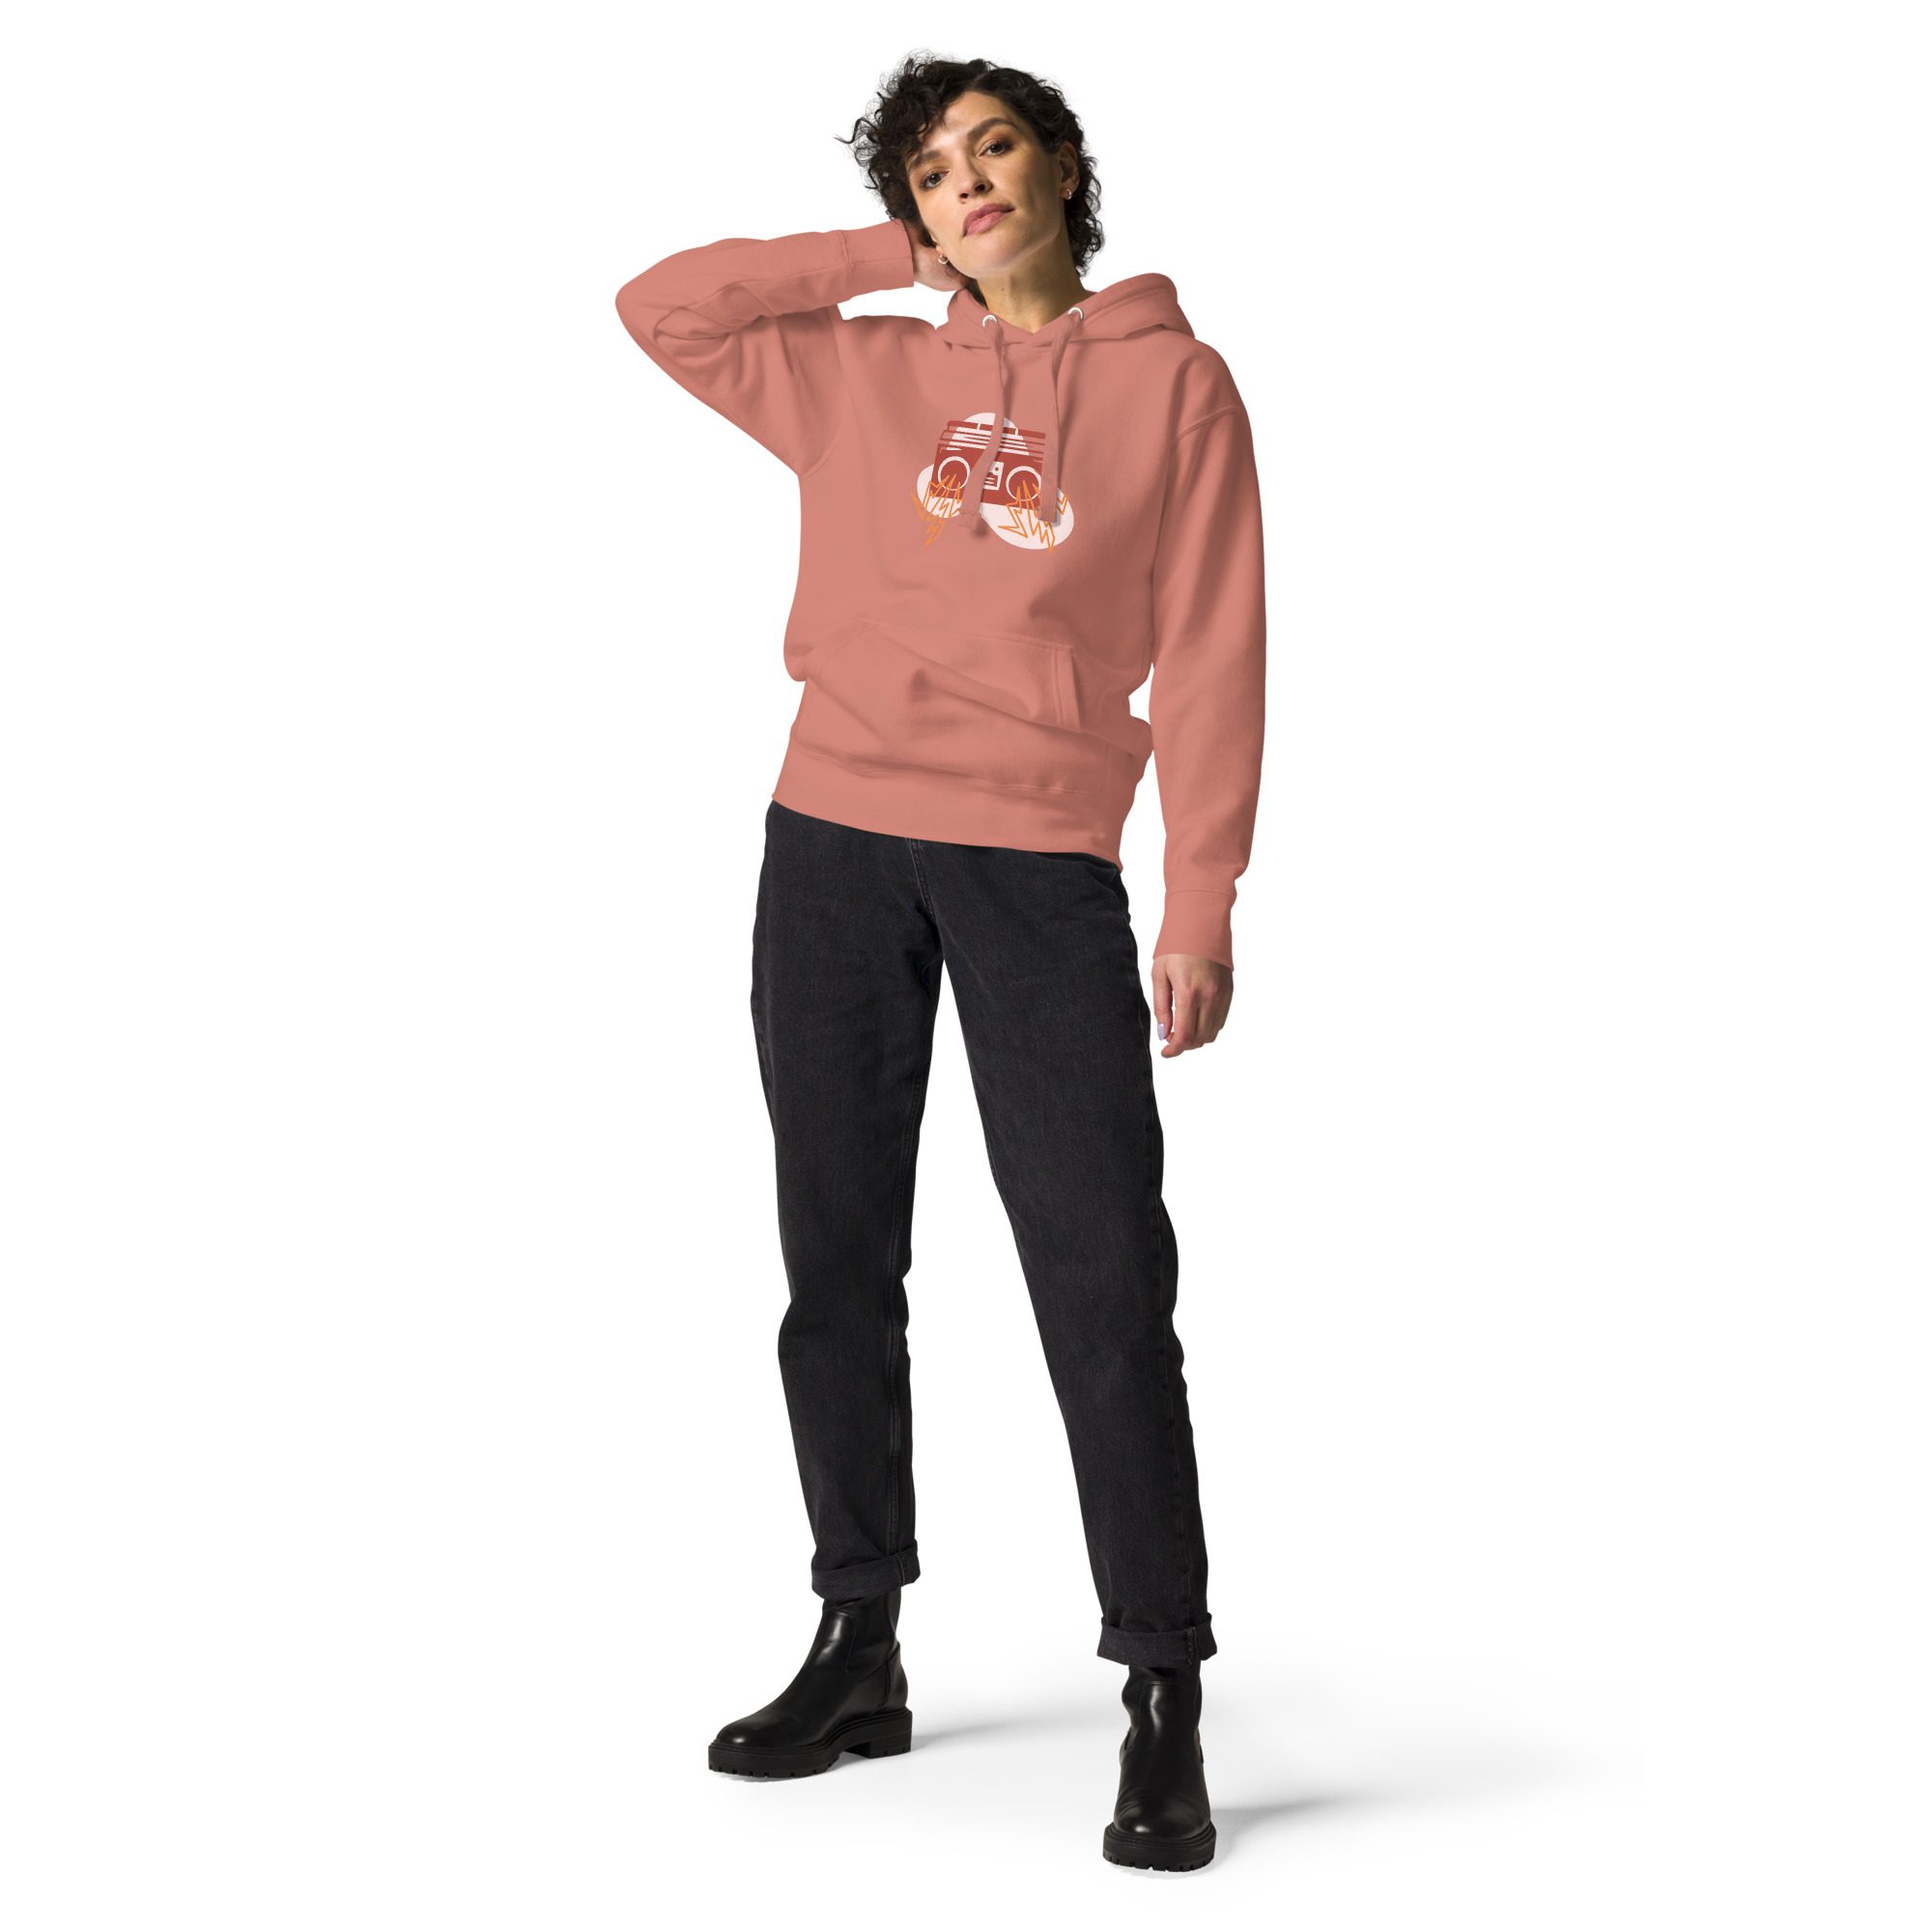 unisex premium hoodie dusty rose front 65297fc6a0a19